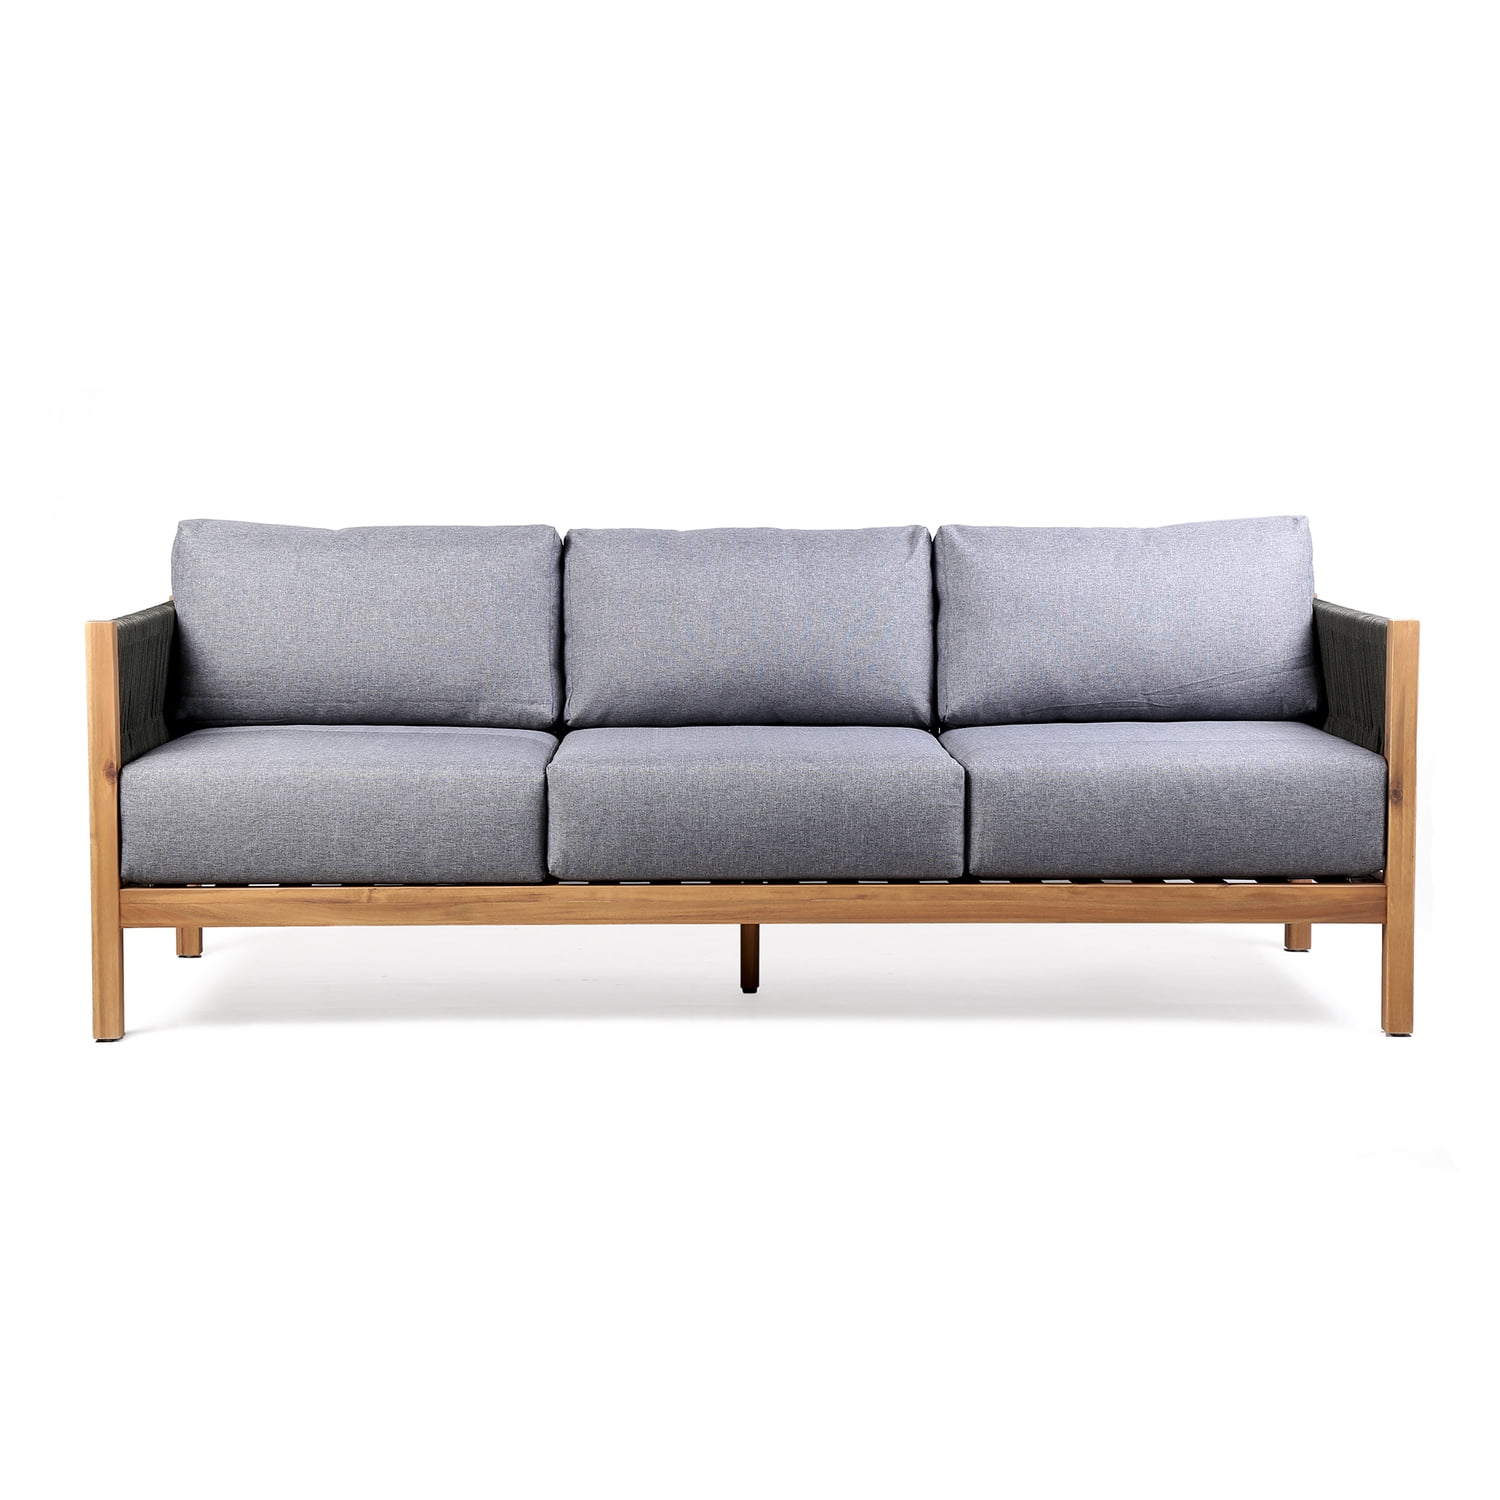 Lcsisowdtk 81 In. Sienna Outdoor Patio Sofa In Acacia Wood With Teak & Fabric, Gray